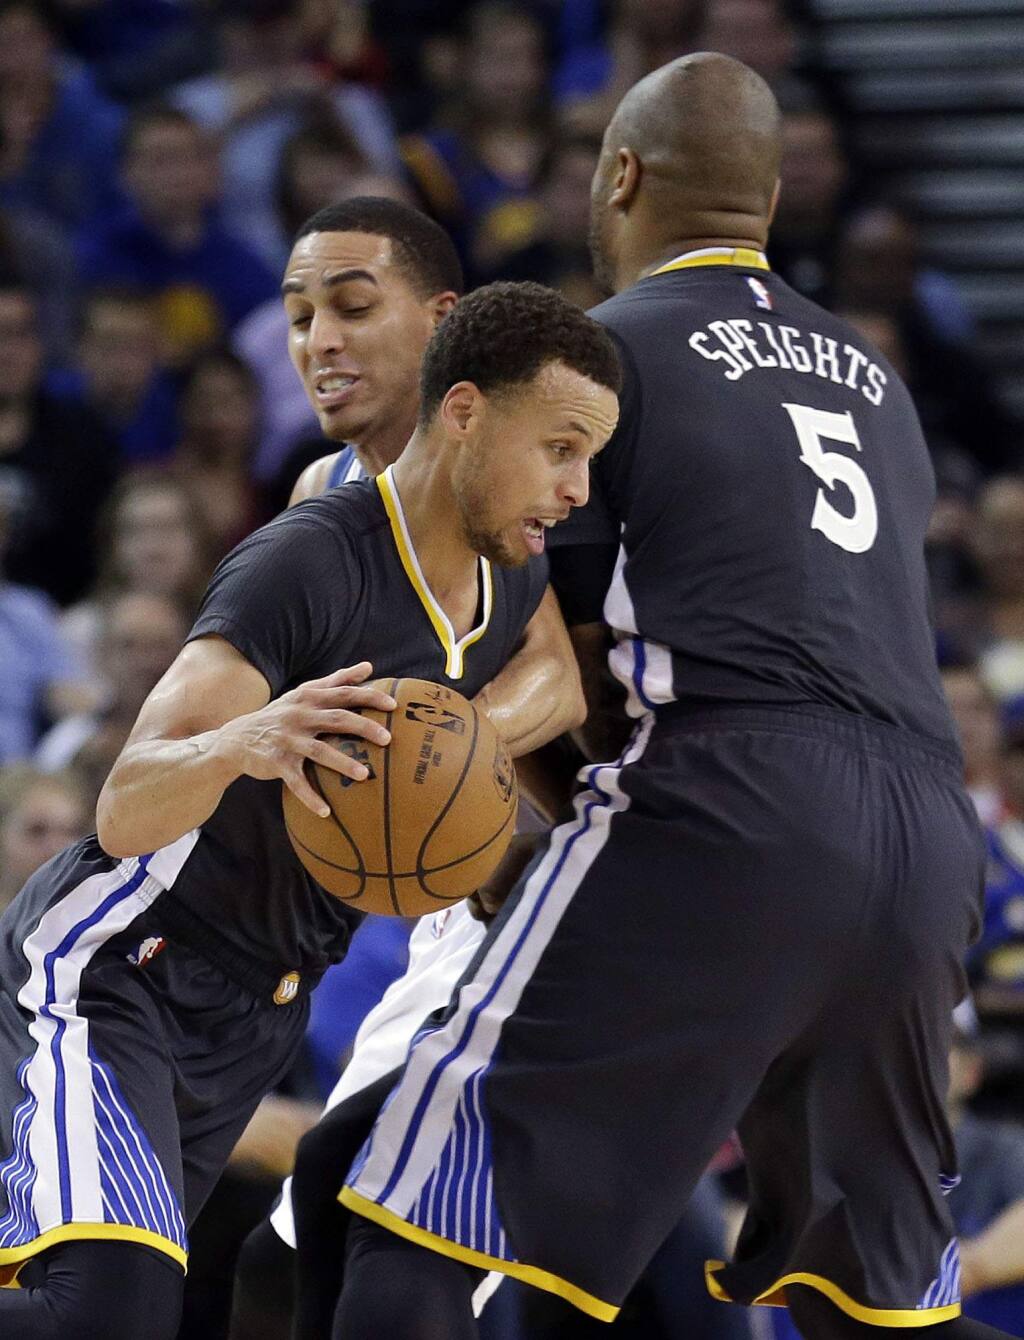 Steph Curry sets sights on Golden State Warriors franchise scoring